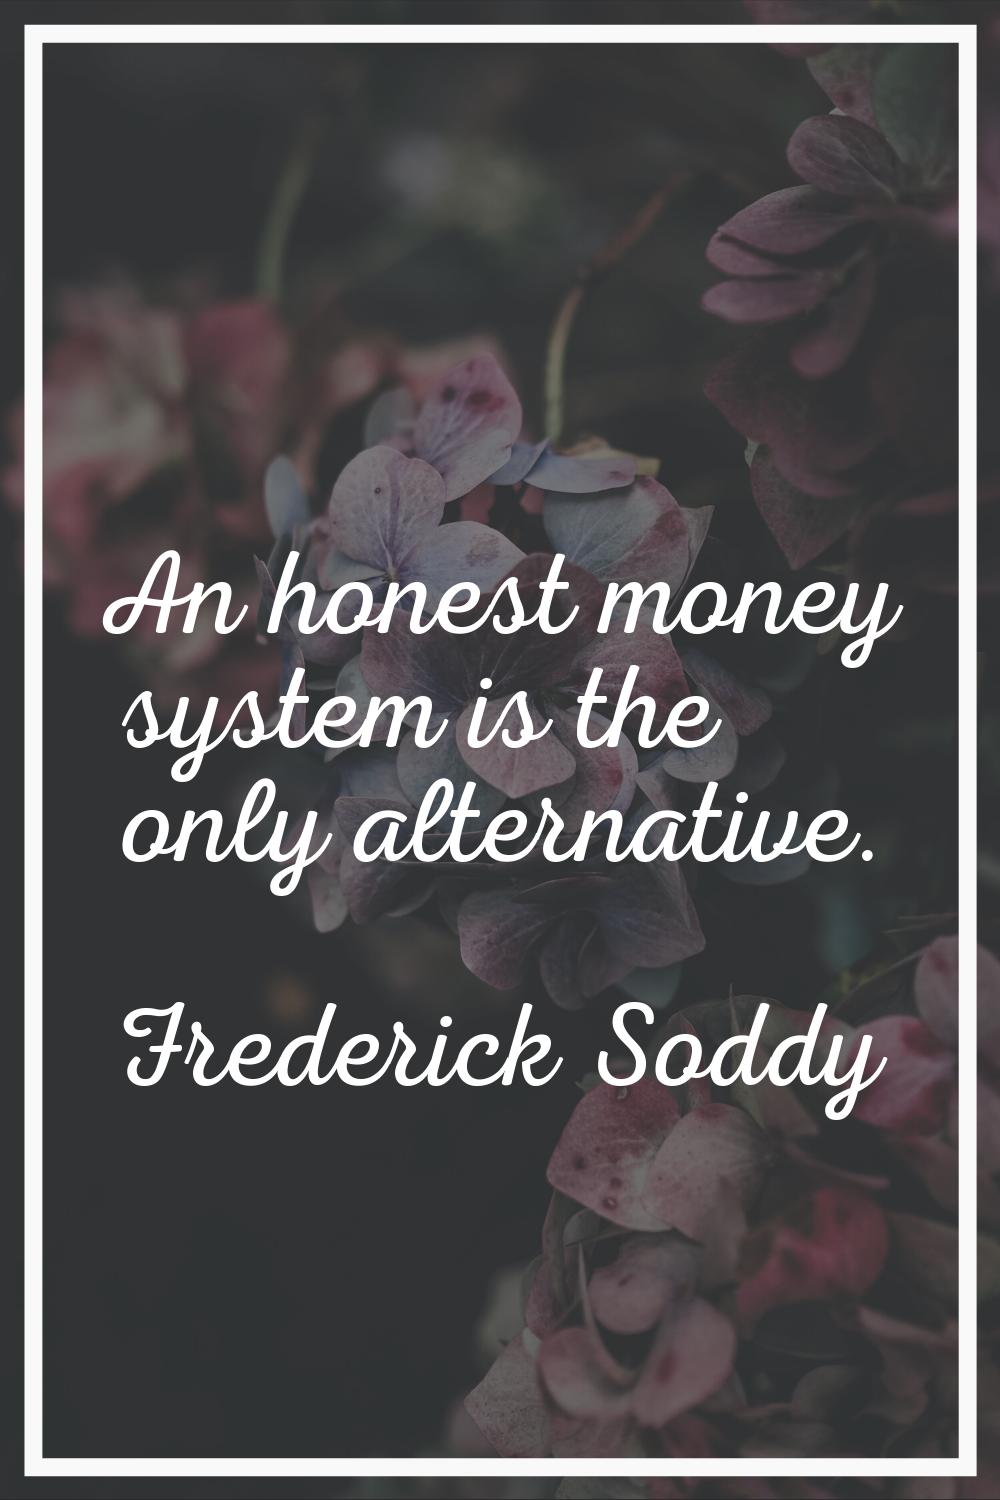 An honest money system is the only alternative.